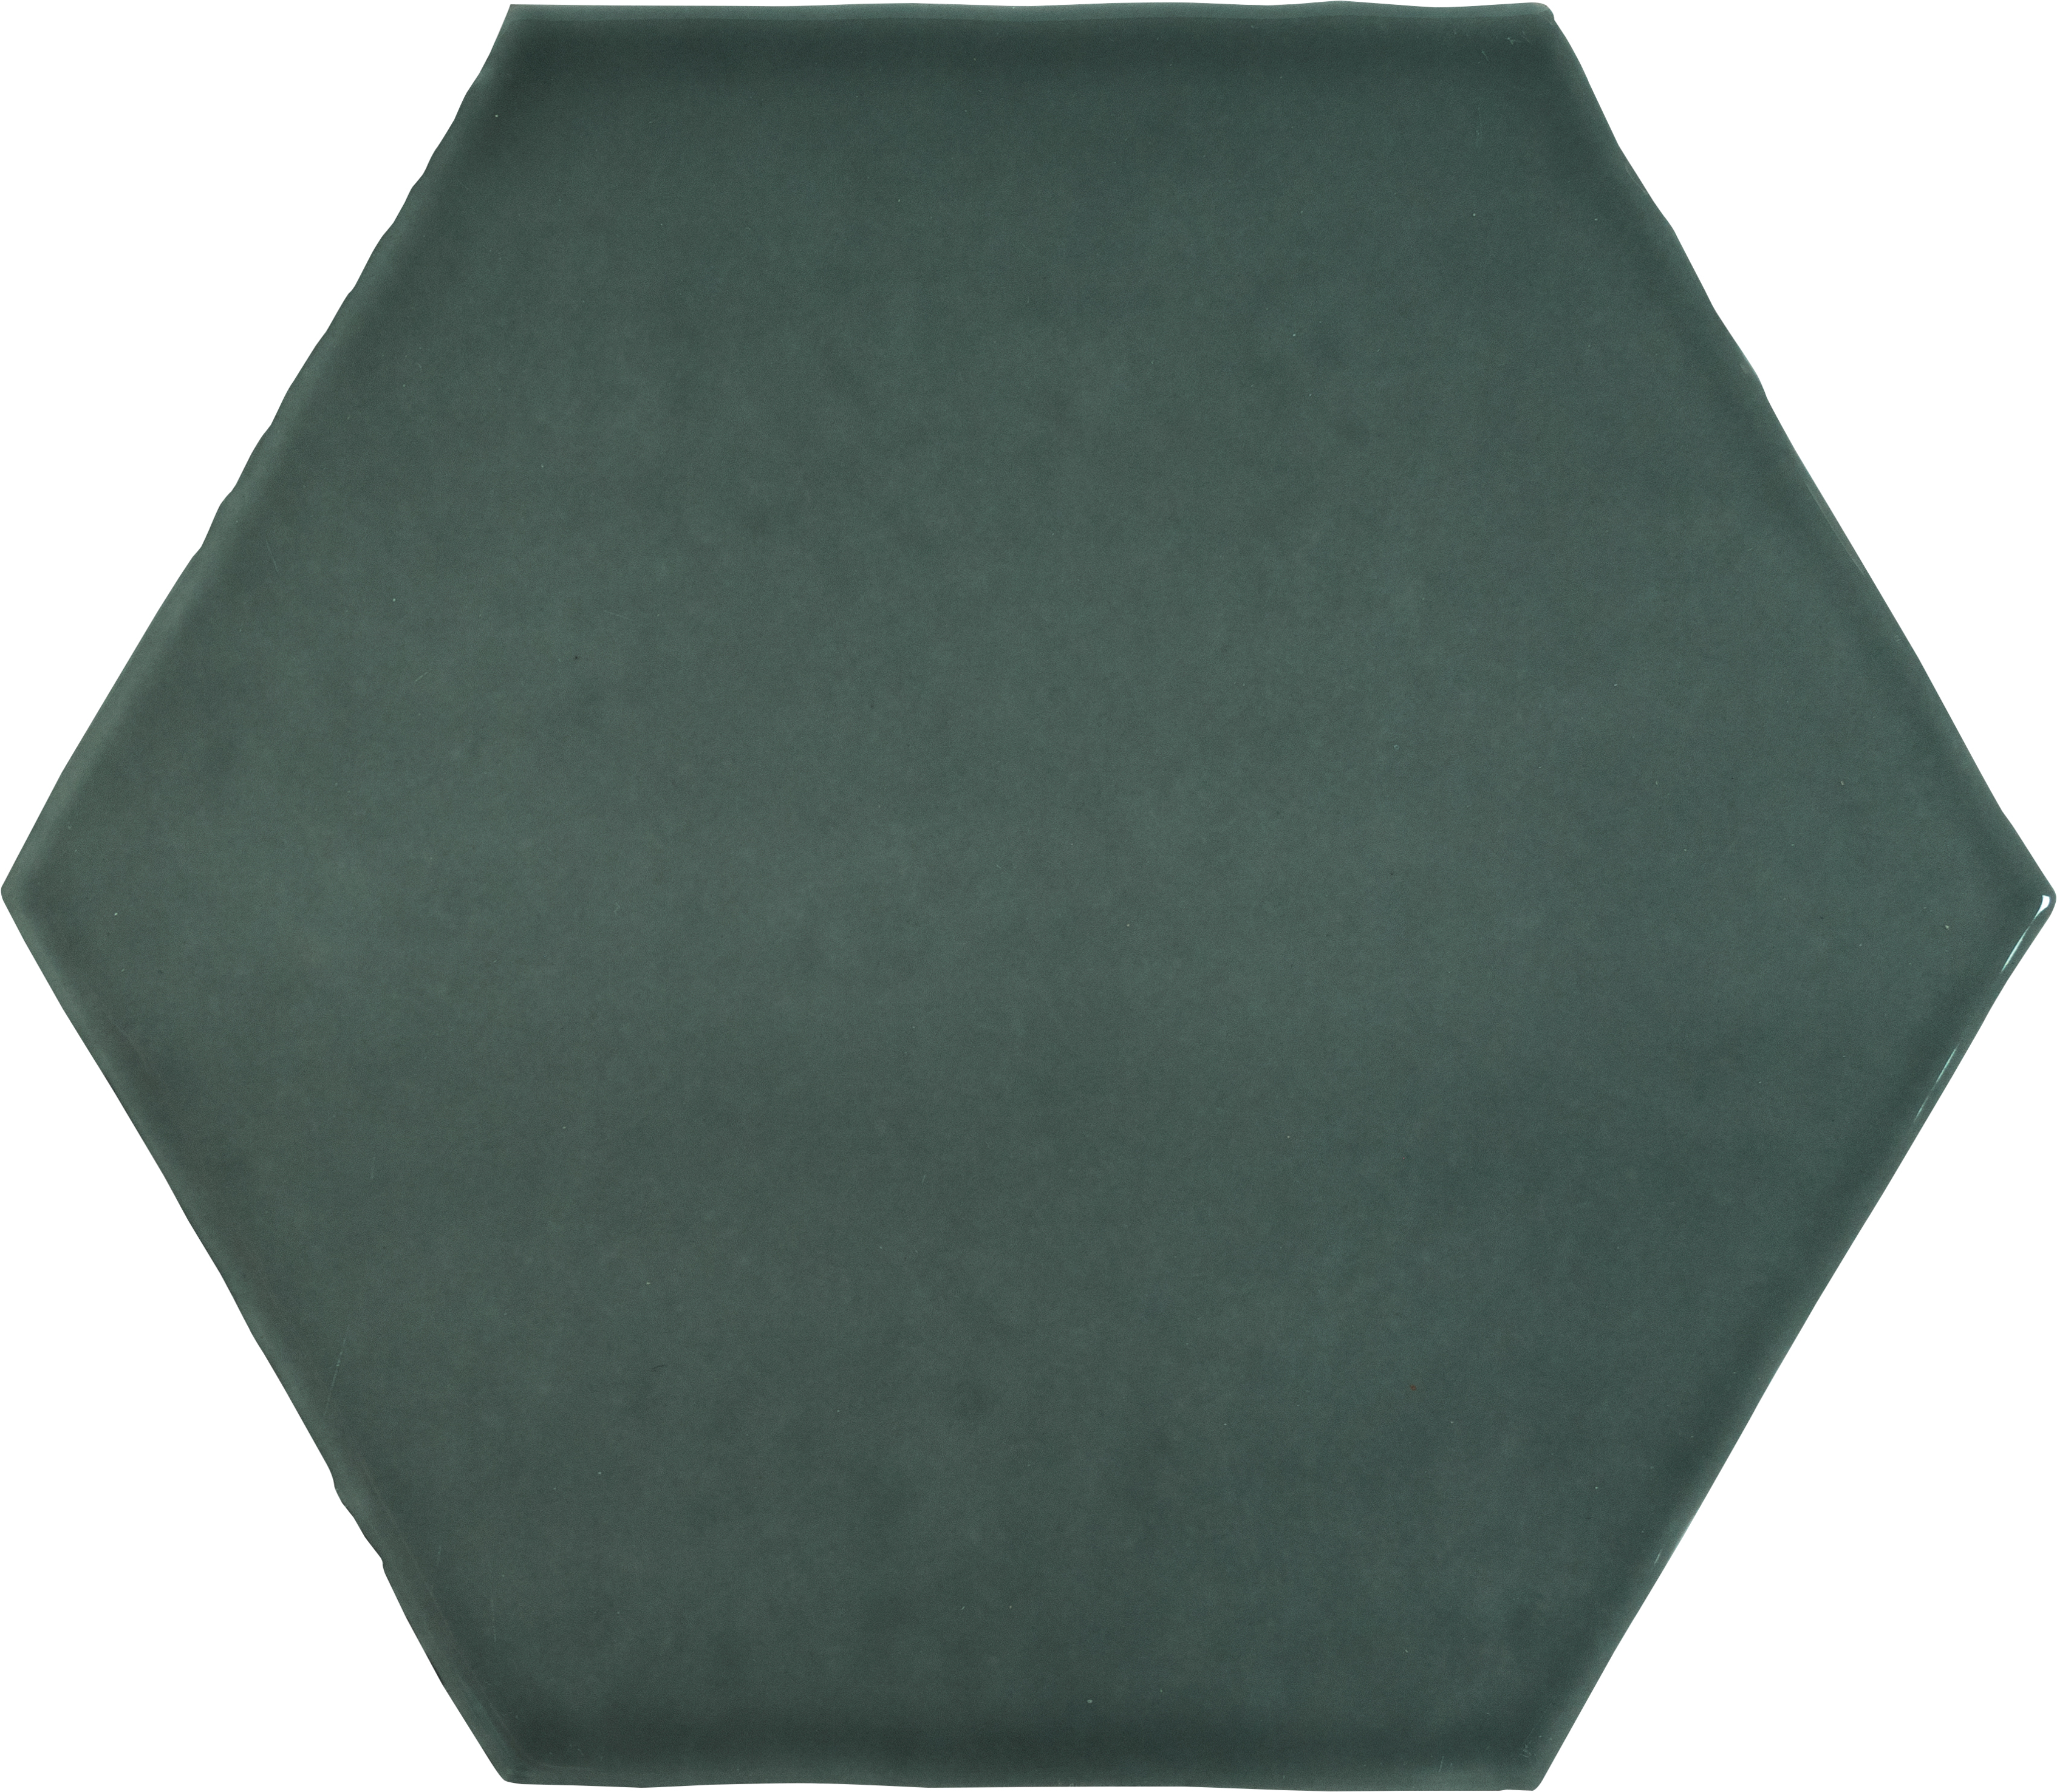 emerald pattern glazed ceramic field tile from teramoda anatolia collection distributed by surface group international glossy finish pressed edge 6-inch hexagon shape